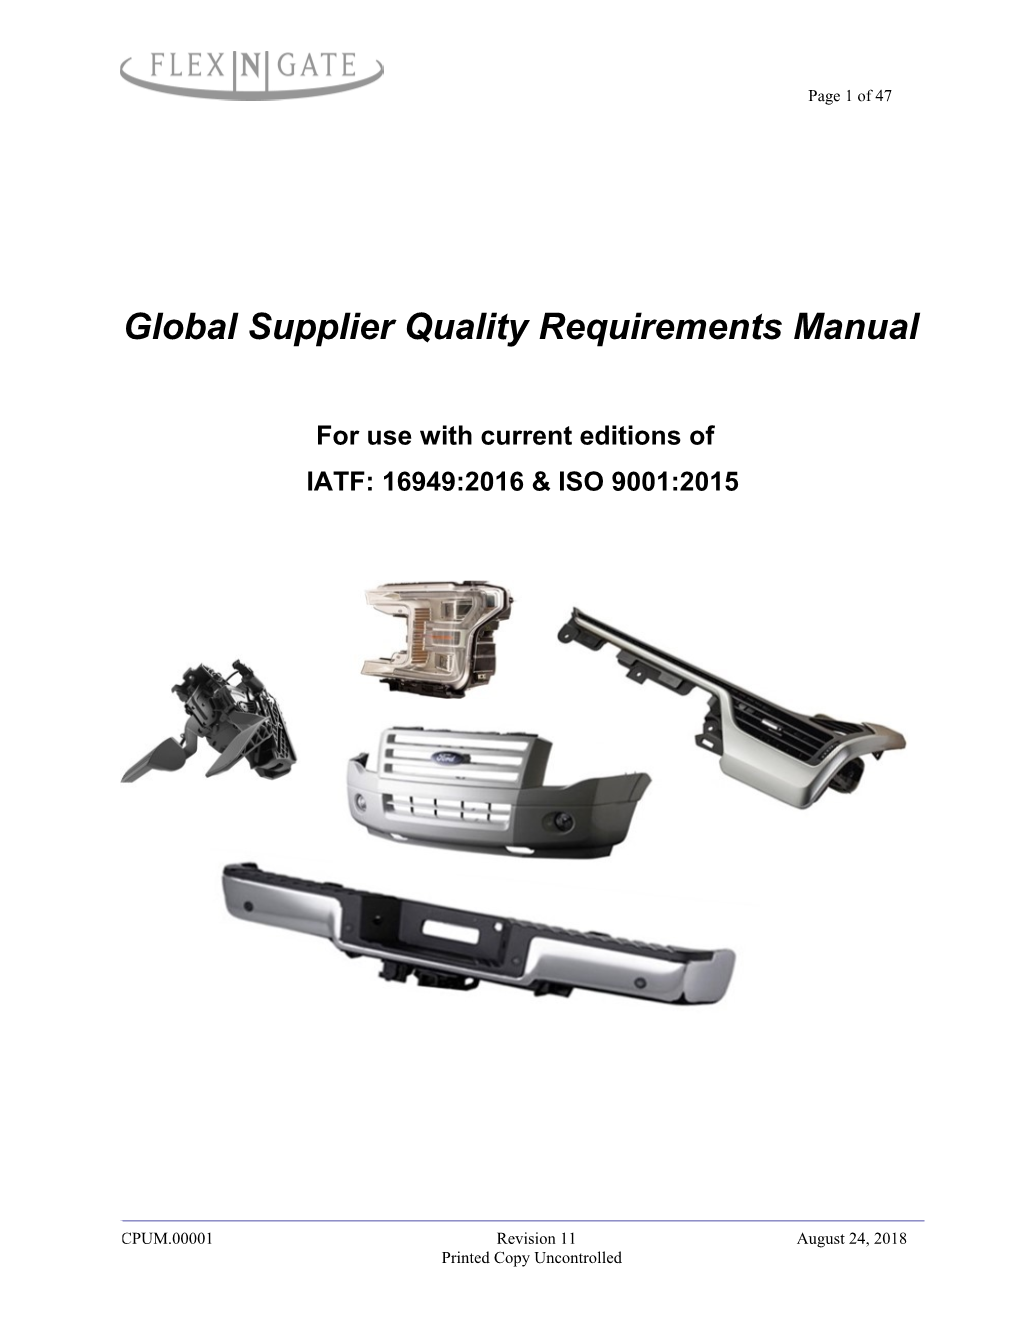 Global Supplier Quality Requirements Manual